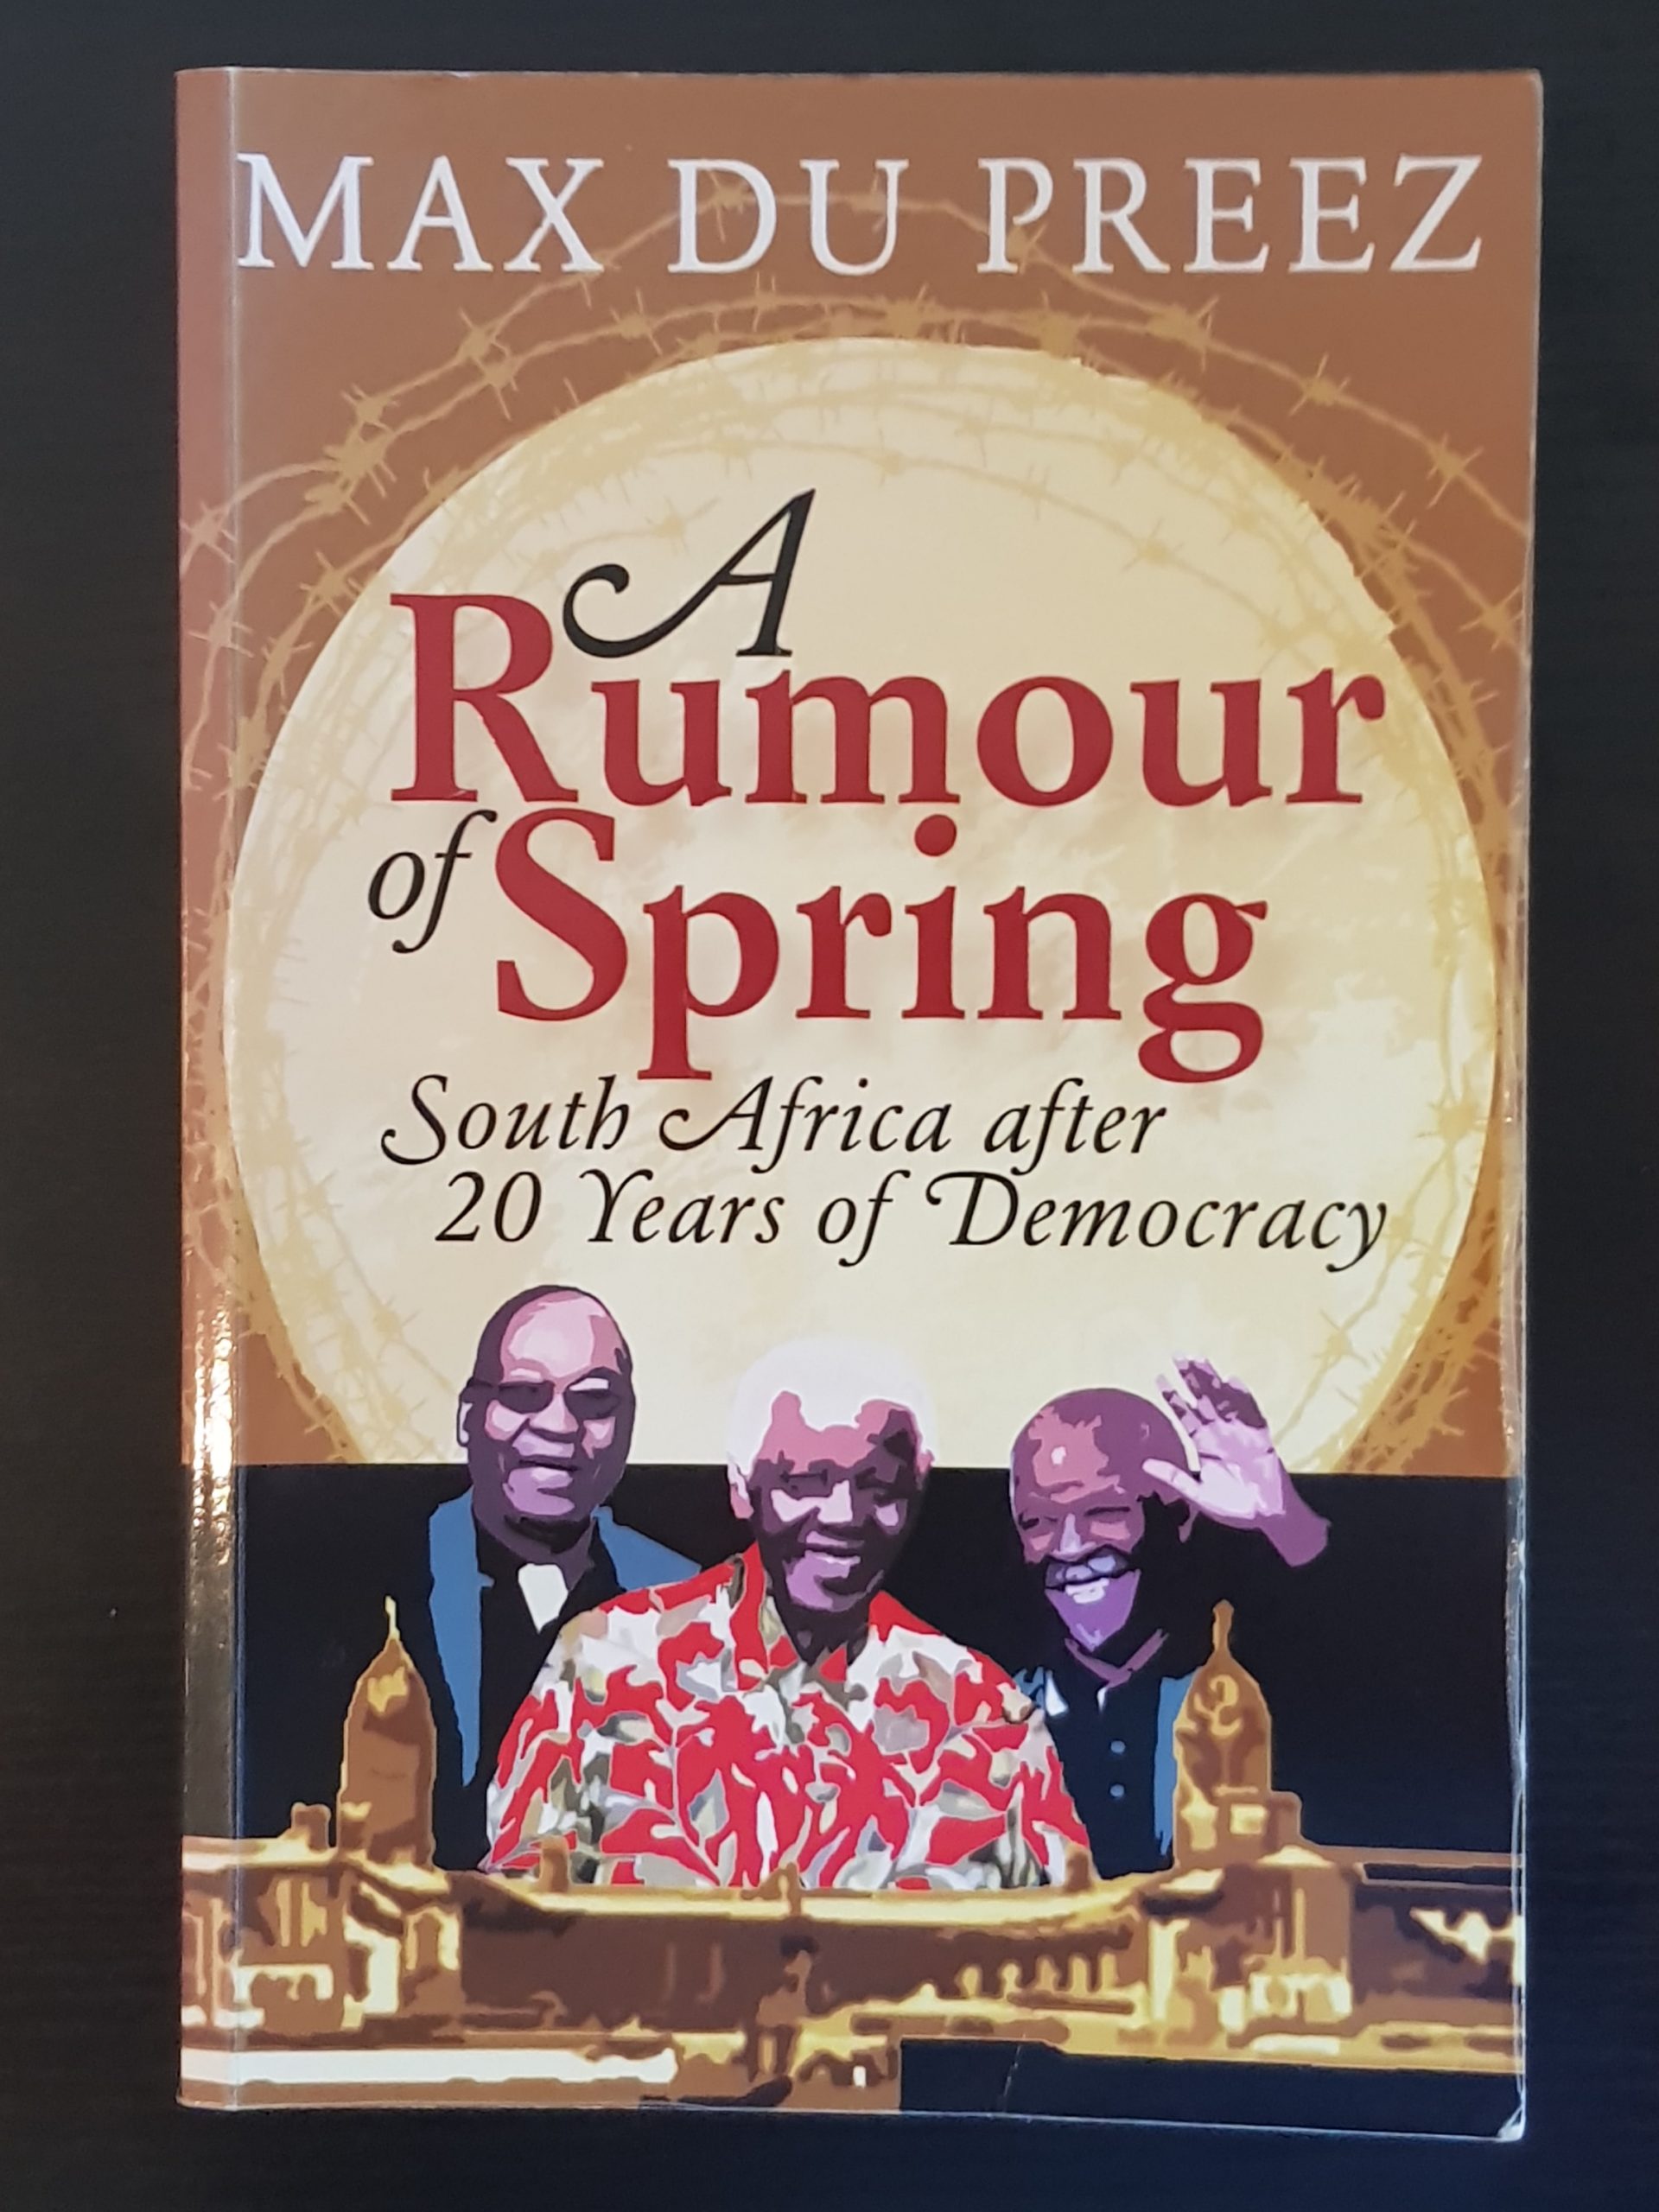 A　Years　Democracy　of　after　Preez　20　Rumour　Africa　du　Spring:　Max　South　of